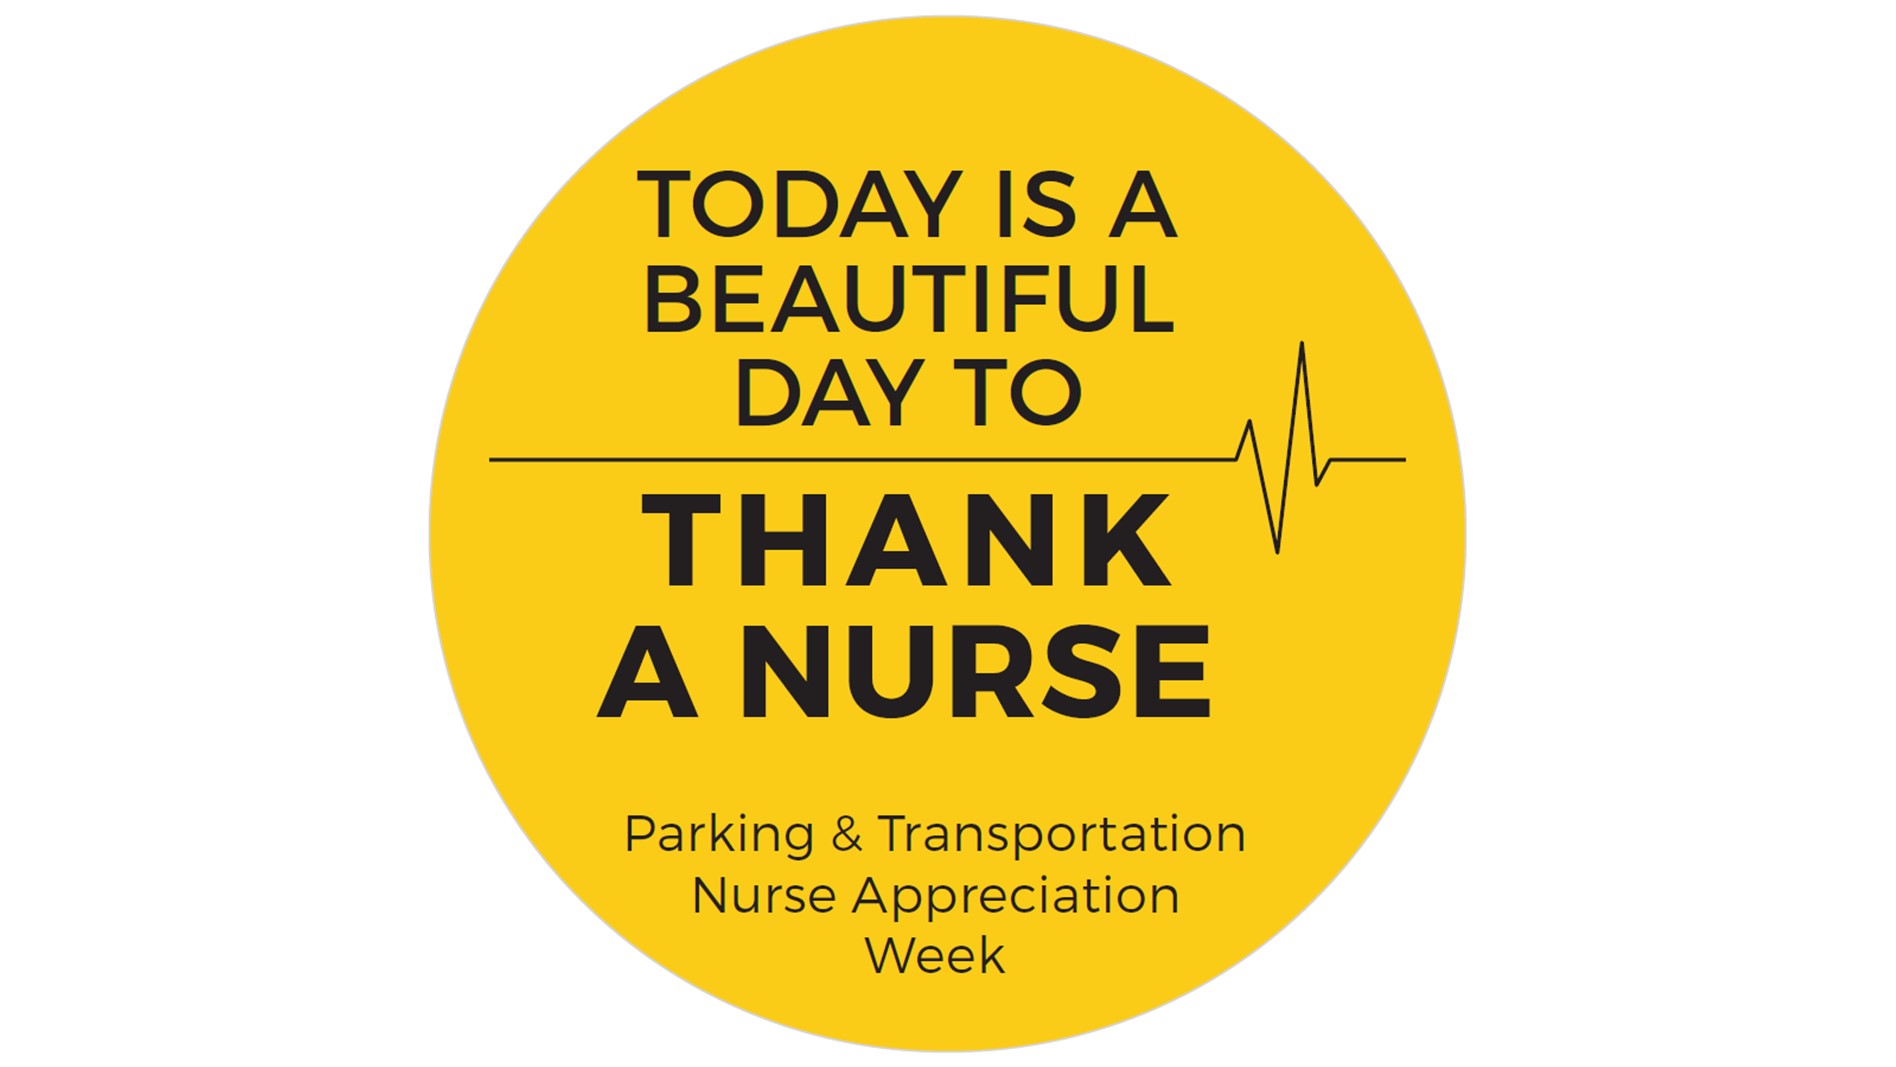 Today is a beautiful day to thank a nurse